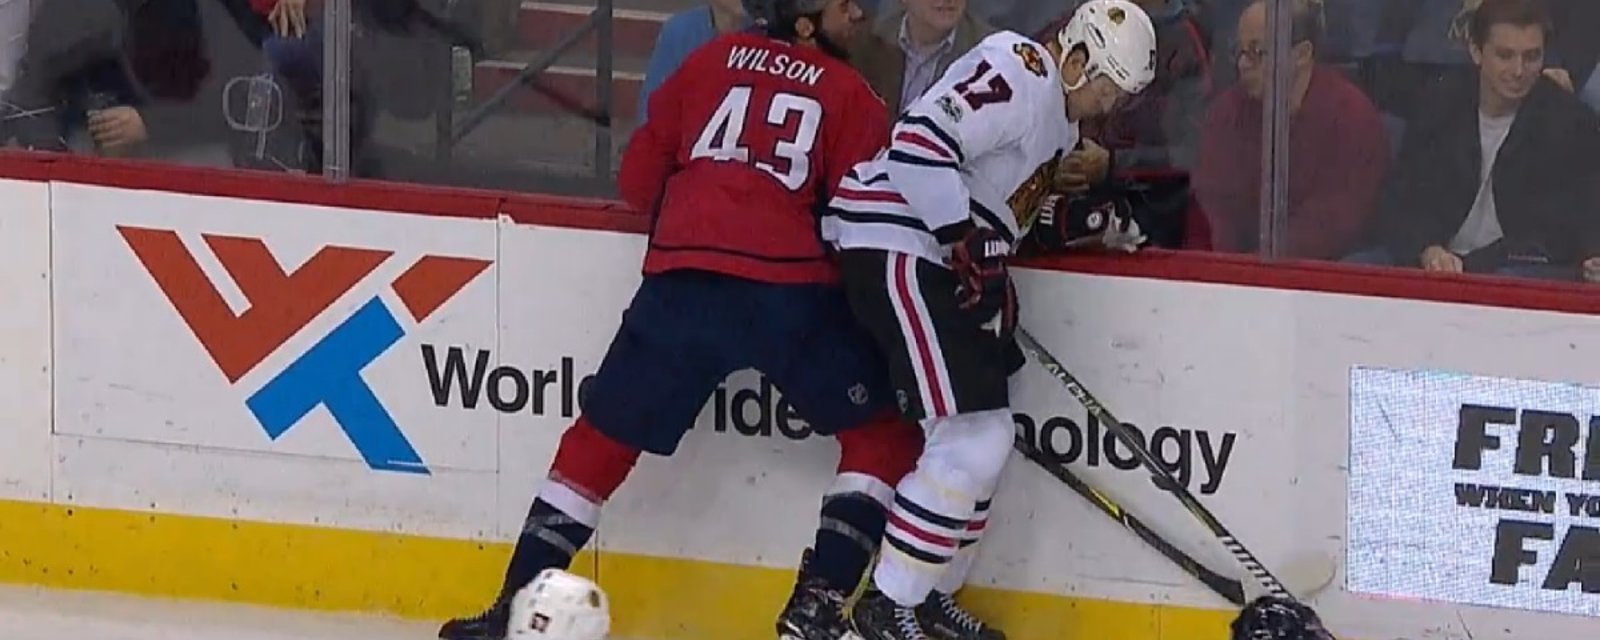 Breaking: Tough guy Tom Wilson injured after big hit along the boards.